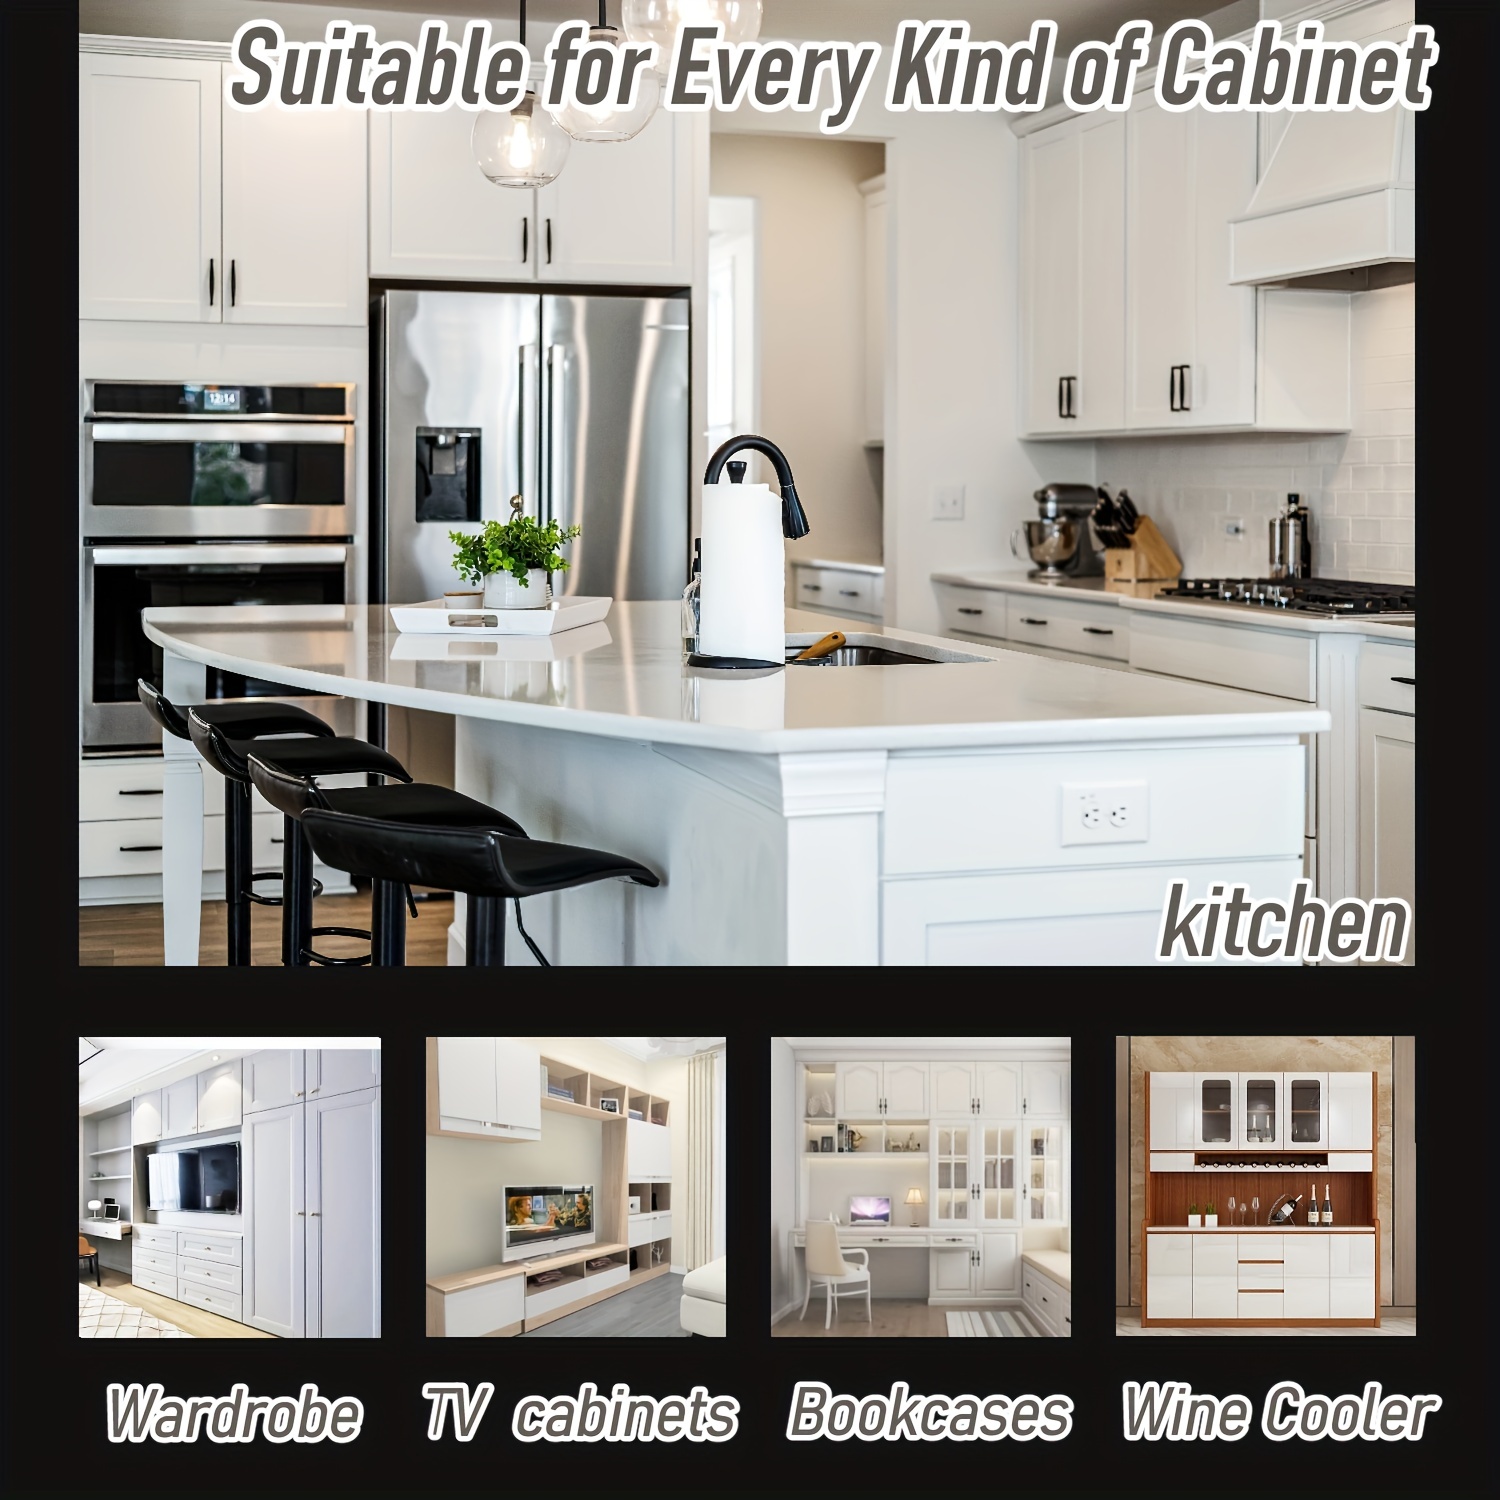 Overlay Hinges - Complete Guide To Overlay, Auto, Cabinet Hinges